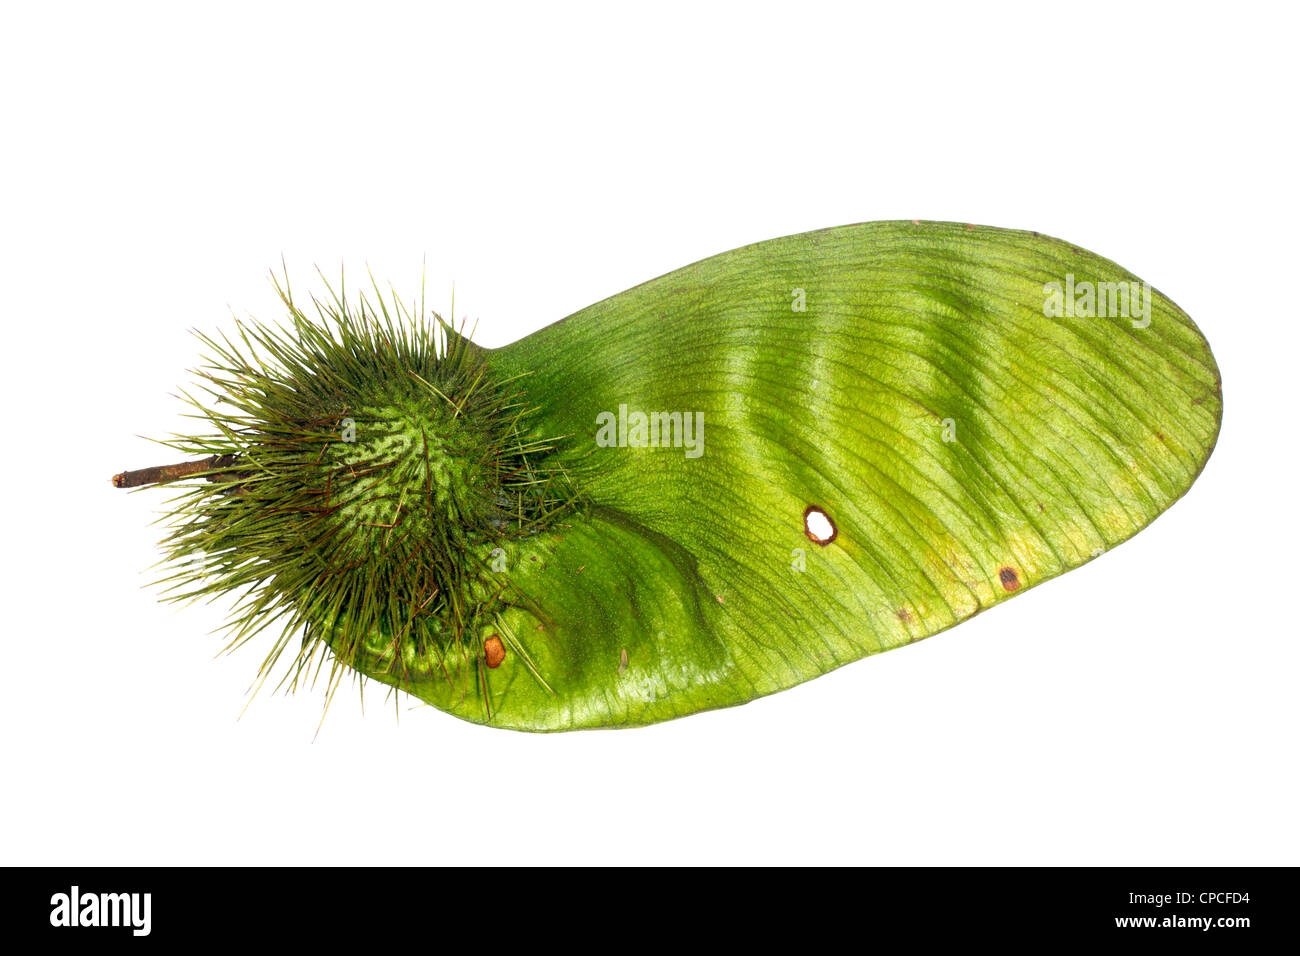 A giant winged seed of a tree from tropical dry forest in southern Ecuador Stock Photo